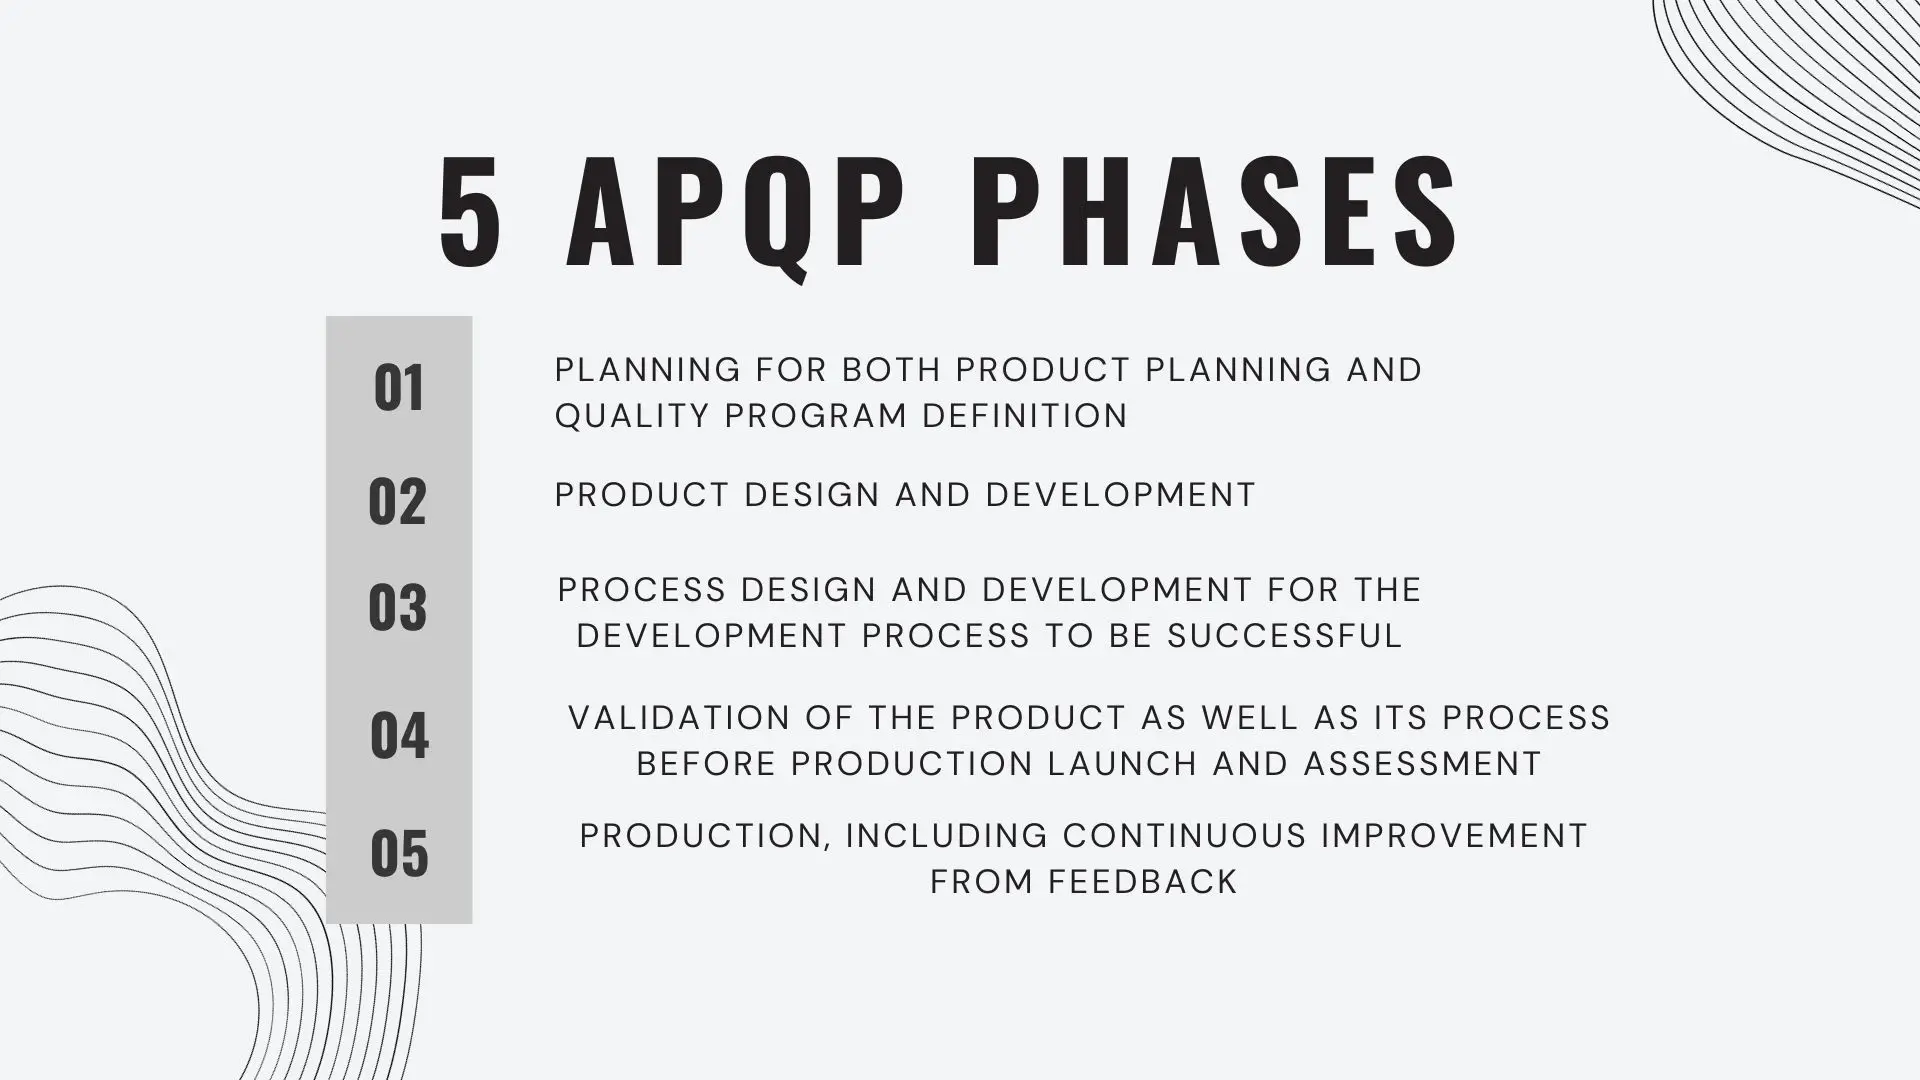 5 Advanced Product Quality Planning Phases